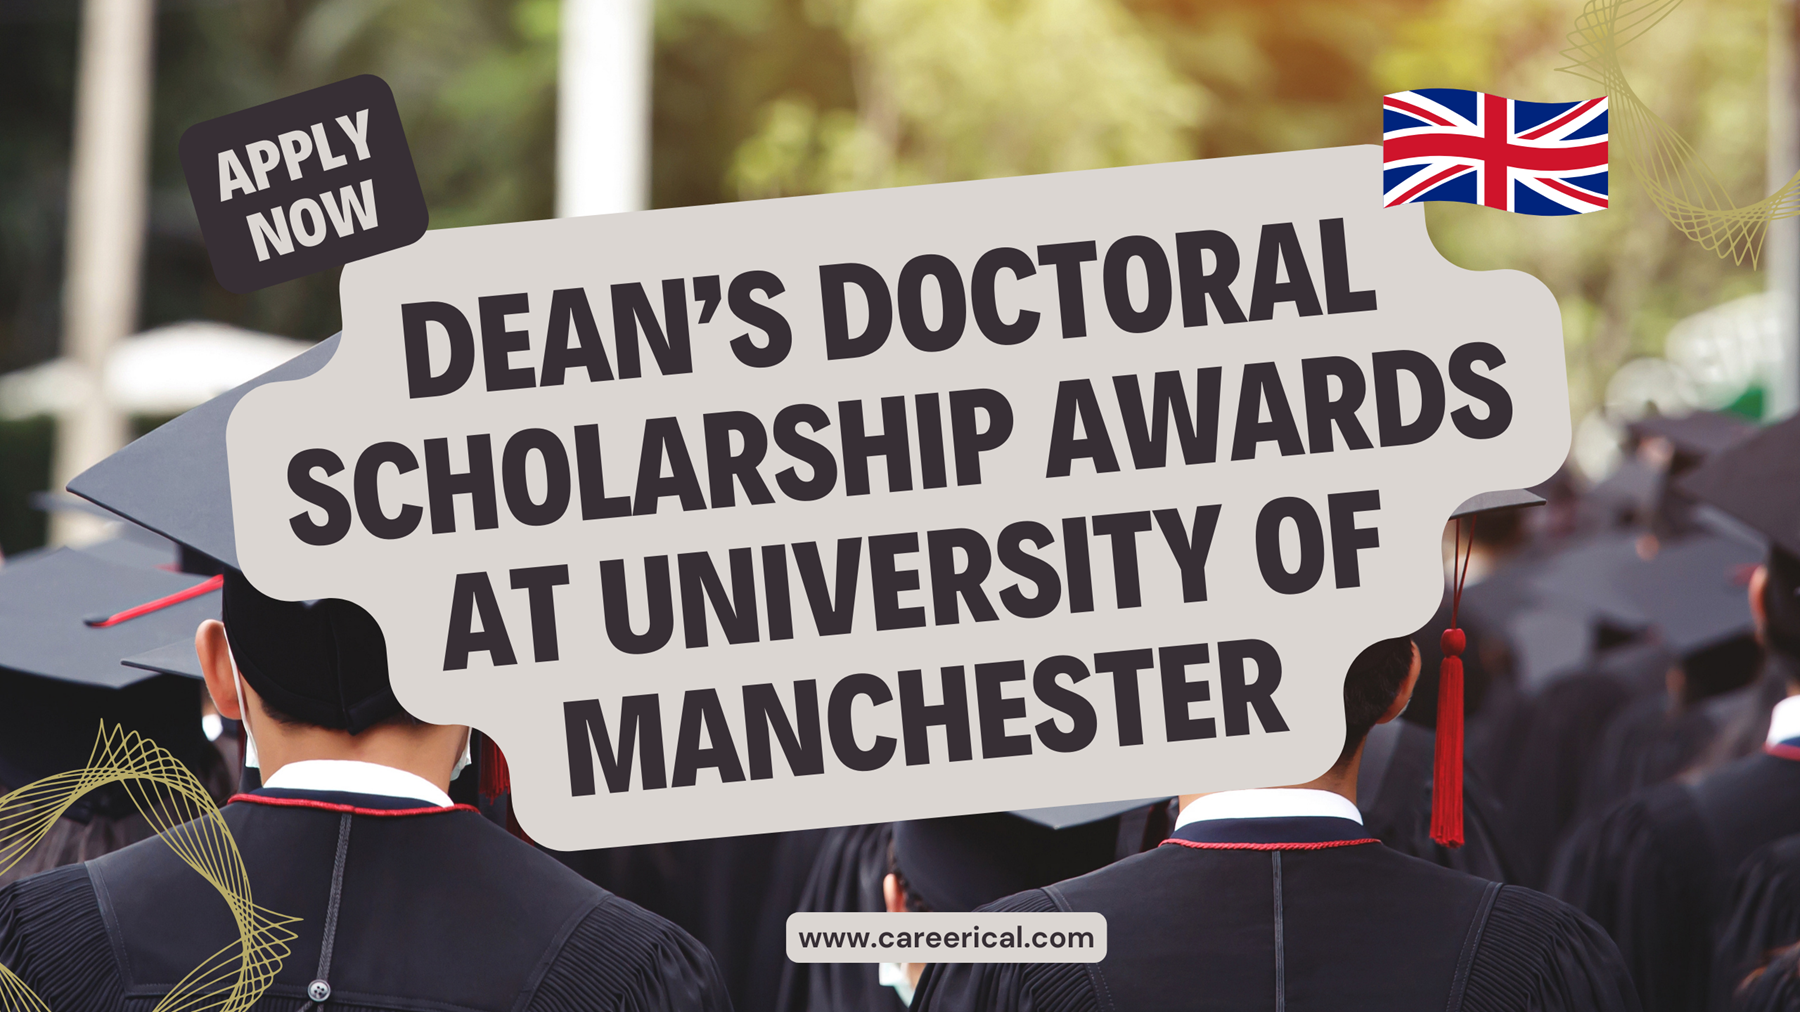 Dean’s Doctoral Scholarship Awards at University of Manchester